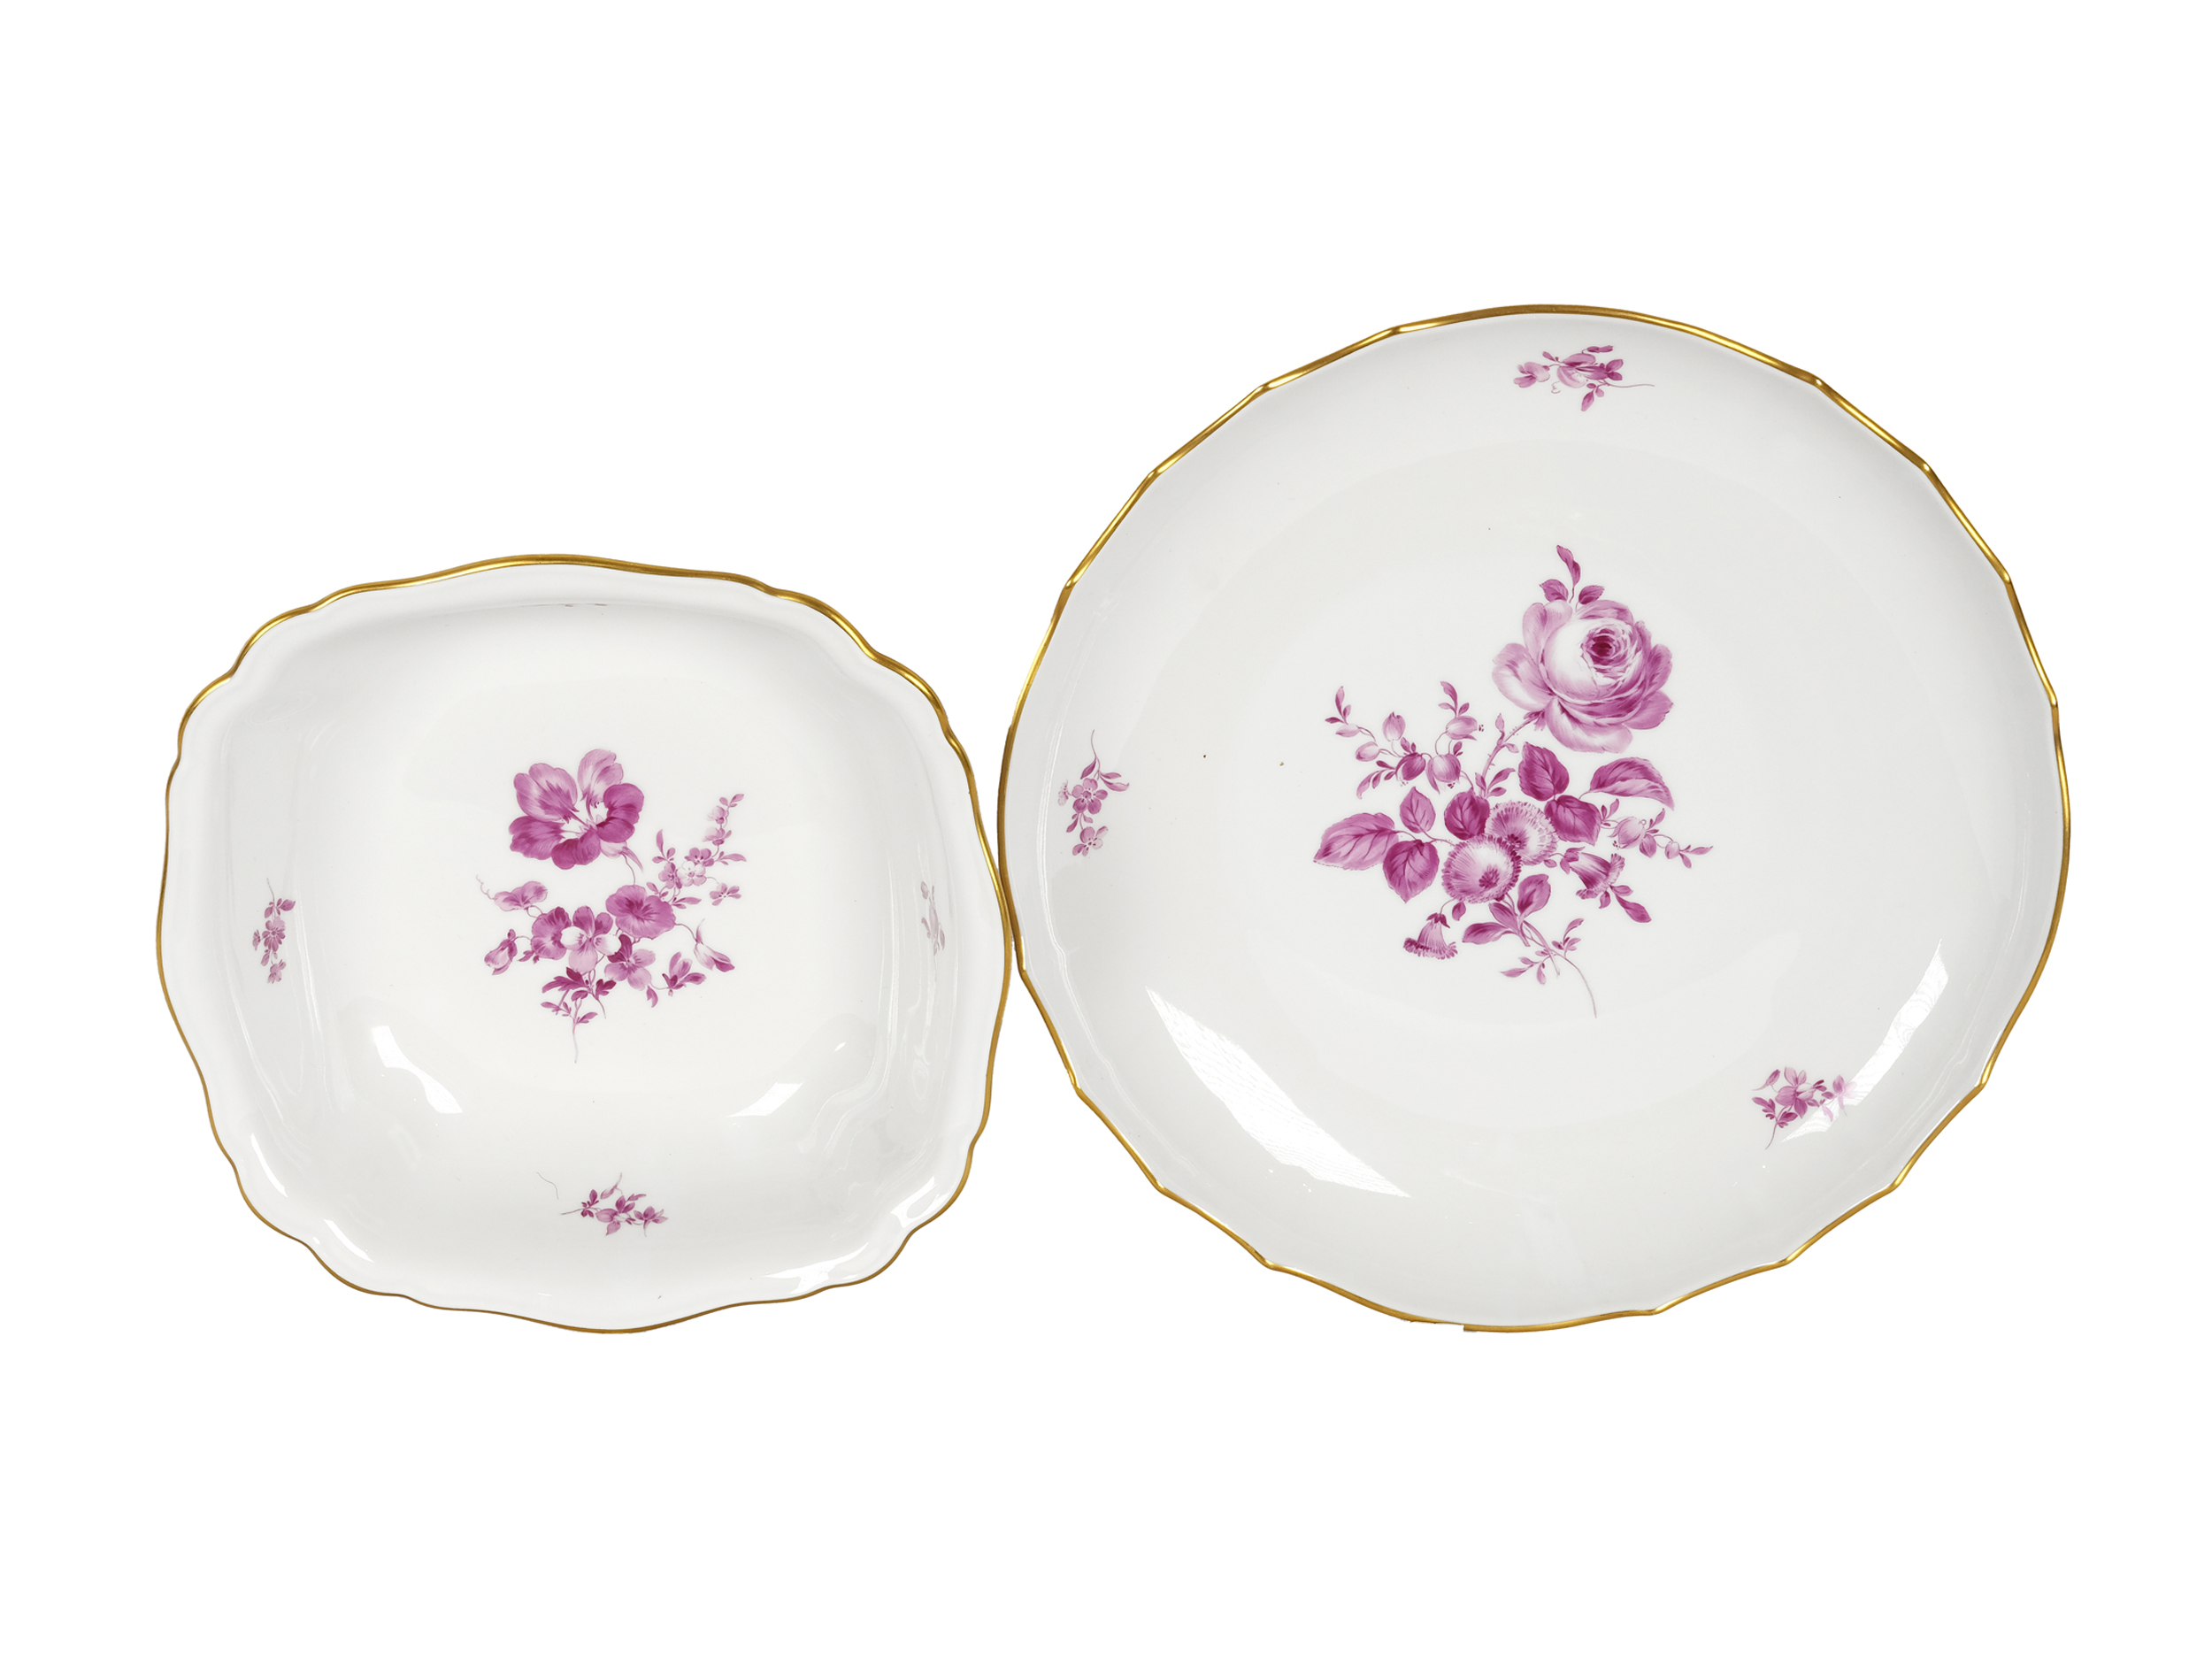 Dinner service for 6 persons, 24-piece, Violet foral decor, Meissen - Image 6 of 7